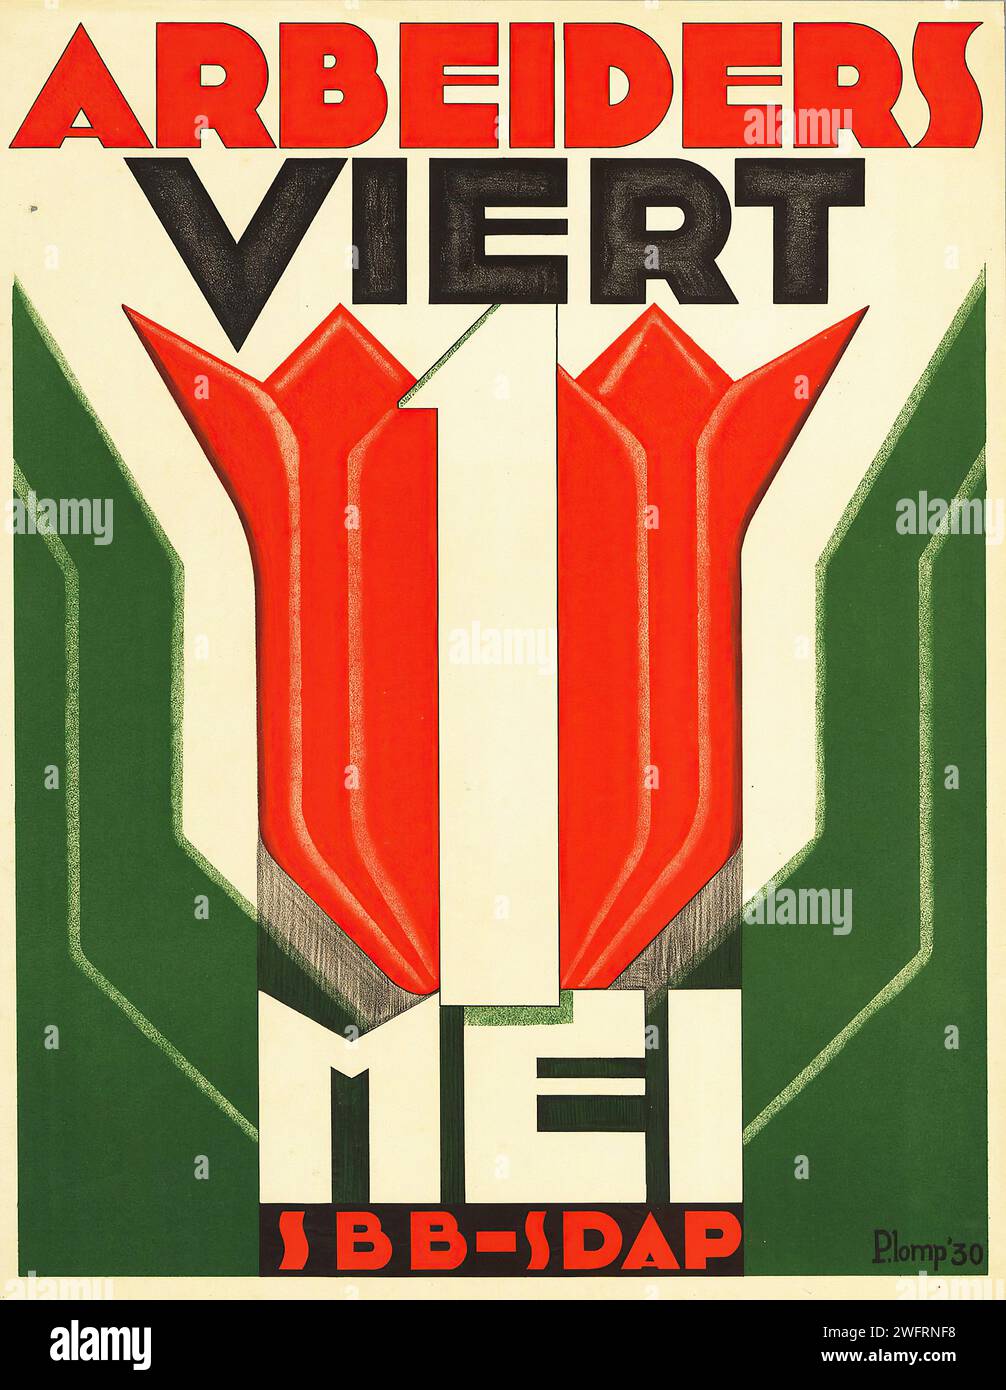 'ARBEIDERS VIERT 1 MEI BB-SDAP' which translates to 'WORKERS CELEBRATE MAY 1 BB-SDAP' Vintage Dutch Advertising. The image is a bold, graphic poster with strong typographic elements in red and green, representing the celebration of International Workers' Day by the social democratic party. The style is stark and propagandistic, with a focus on symmetry and powerful use of color. Stock Photo